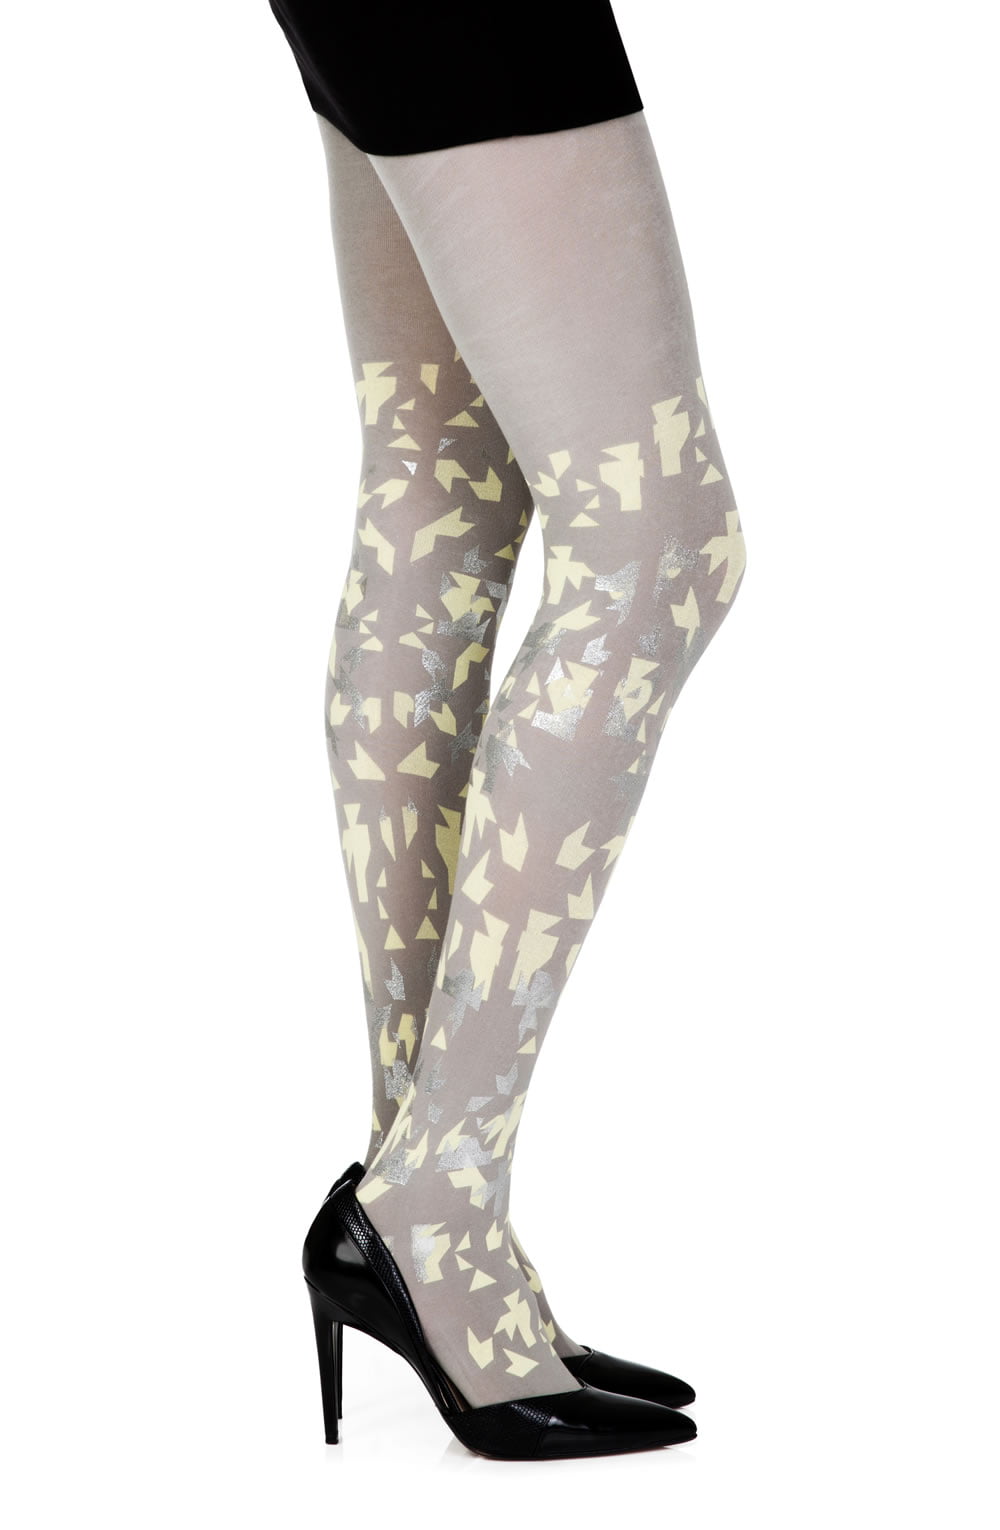 Vibrators, Sex Toy Kits and Sex Toys at Cloud9Adults - Zohara "Confetti" Grey Print Tights - Buy Sex Toys Online